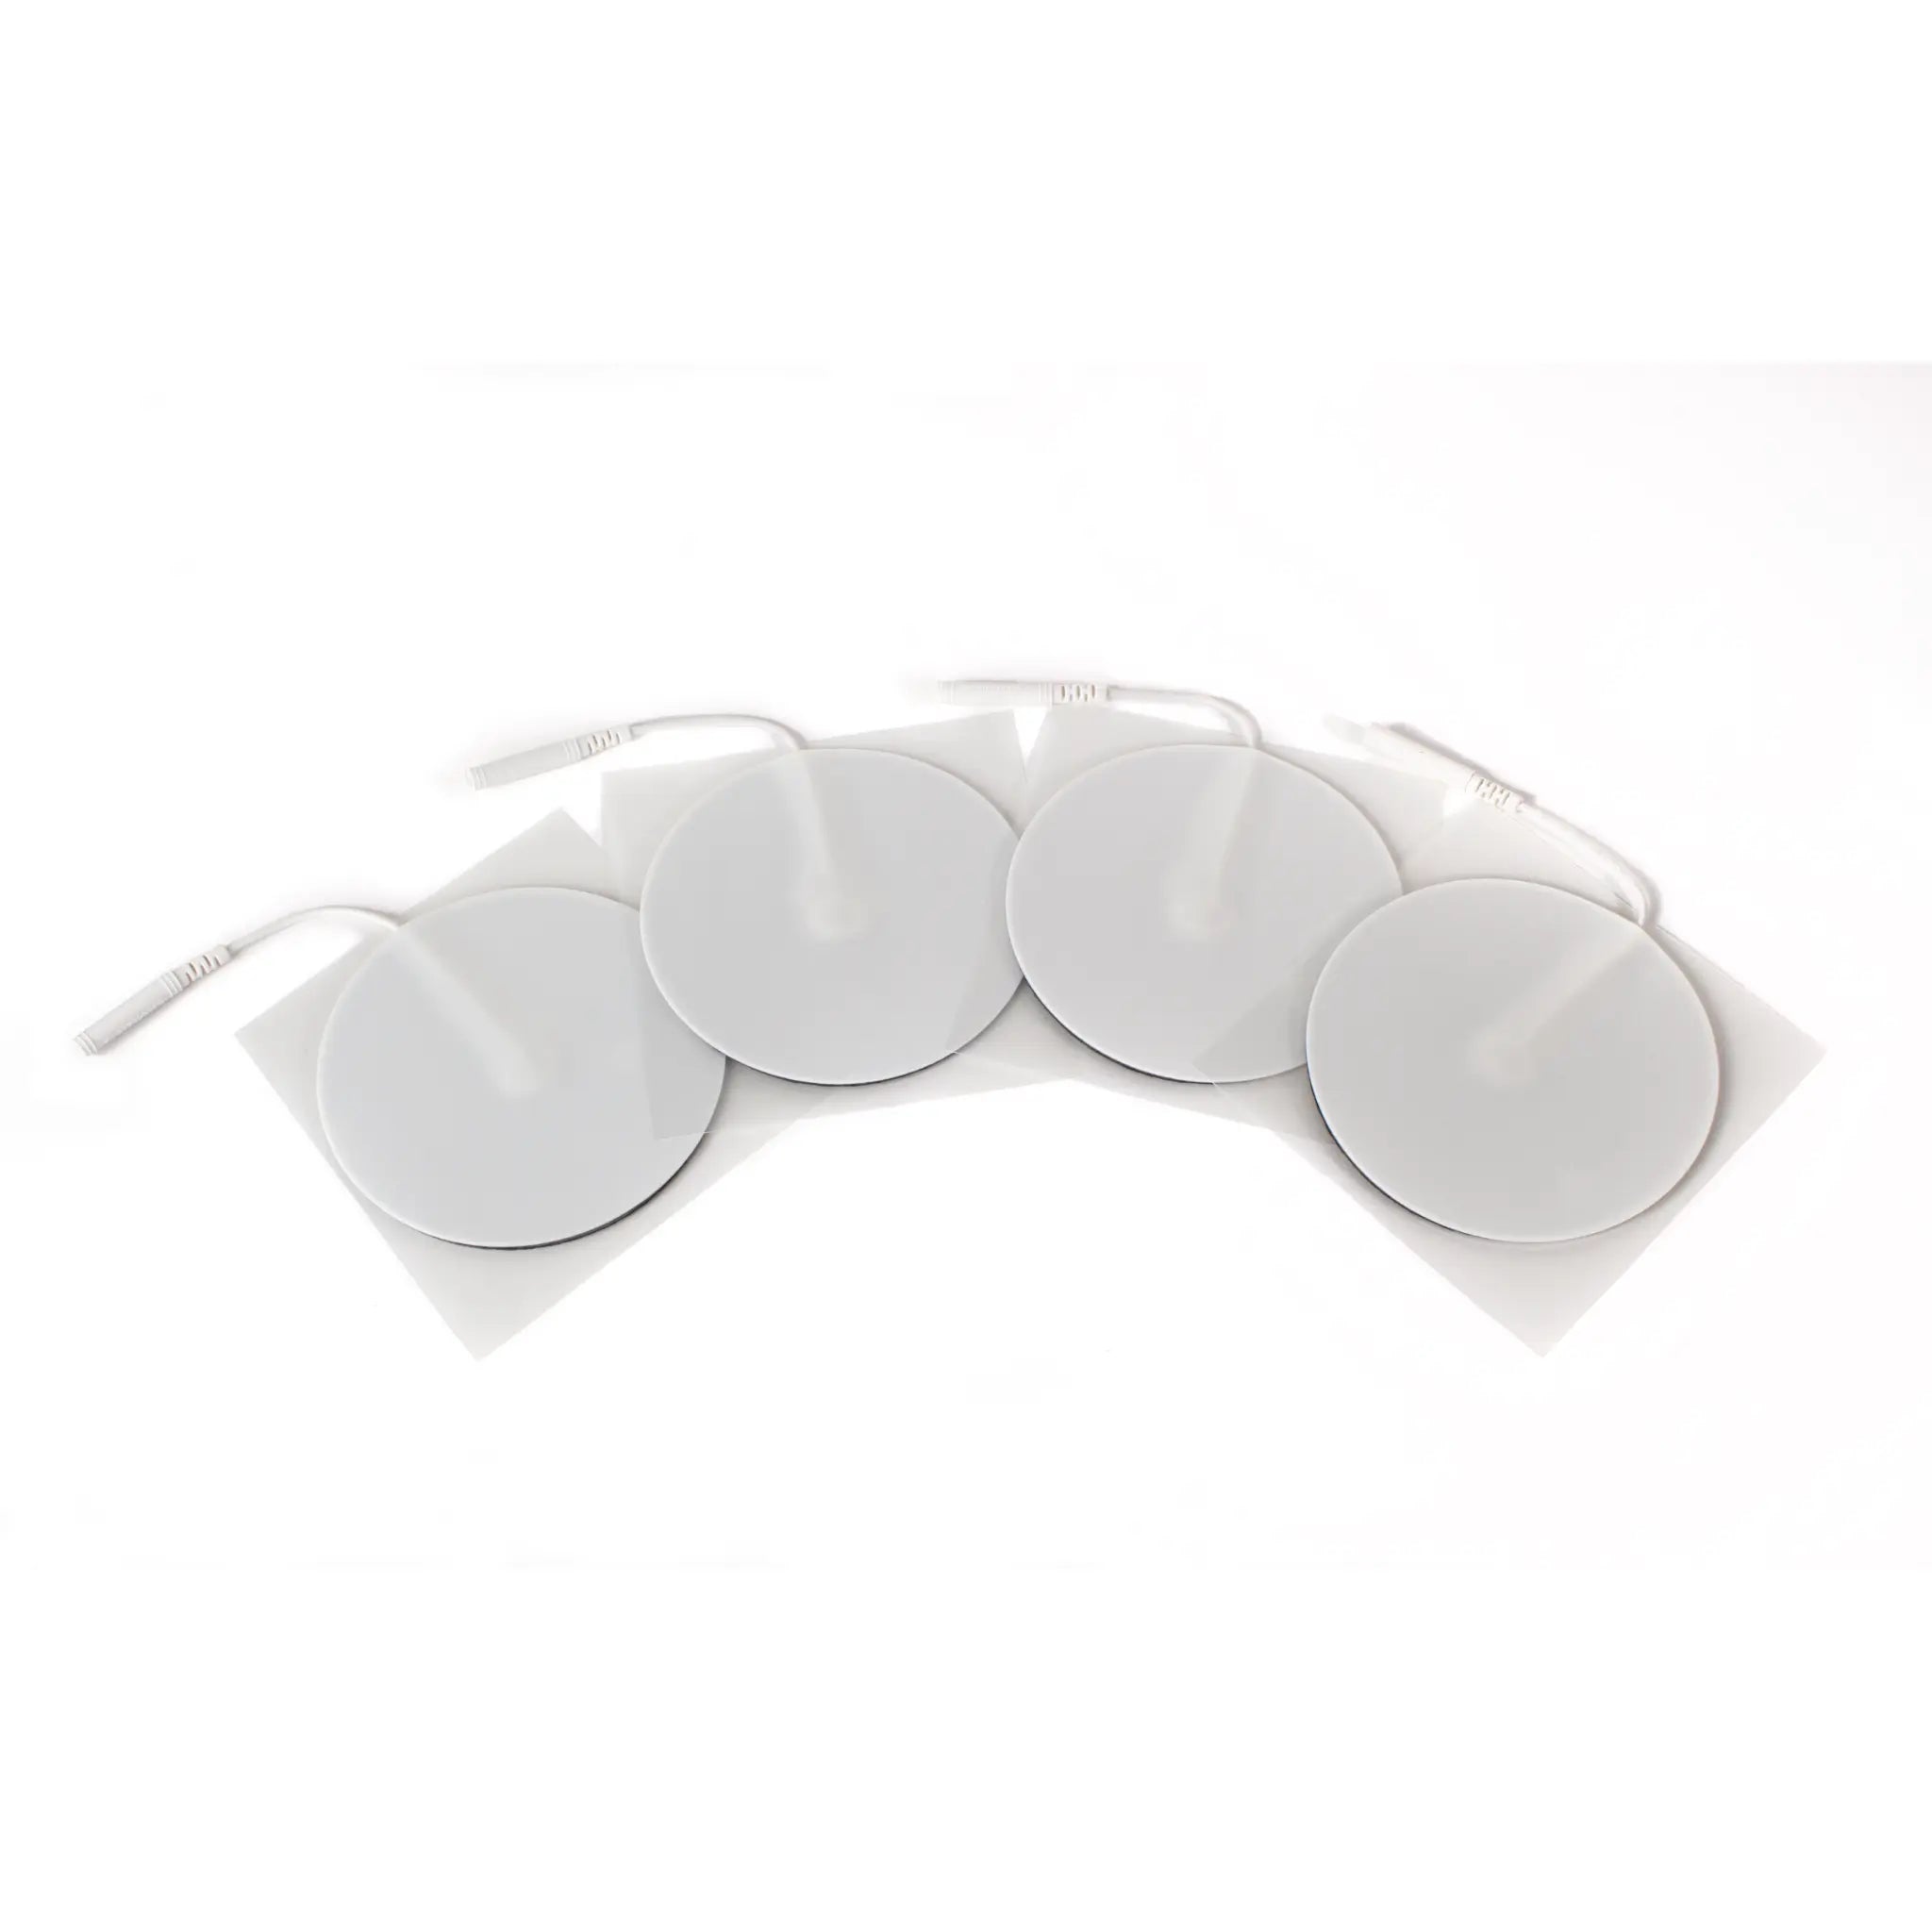 photo of the white round foam conductive pads